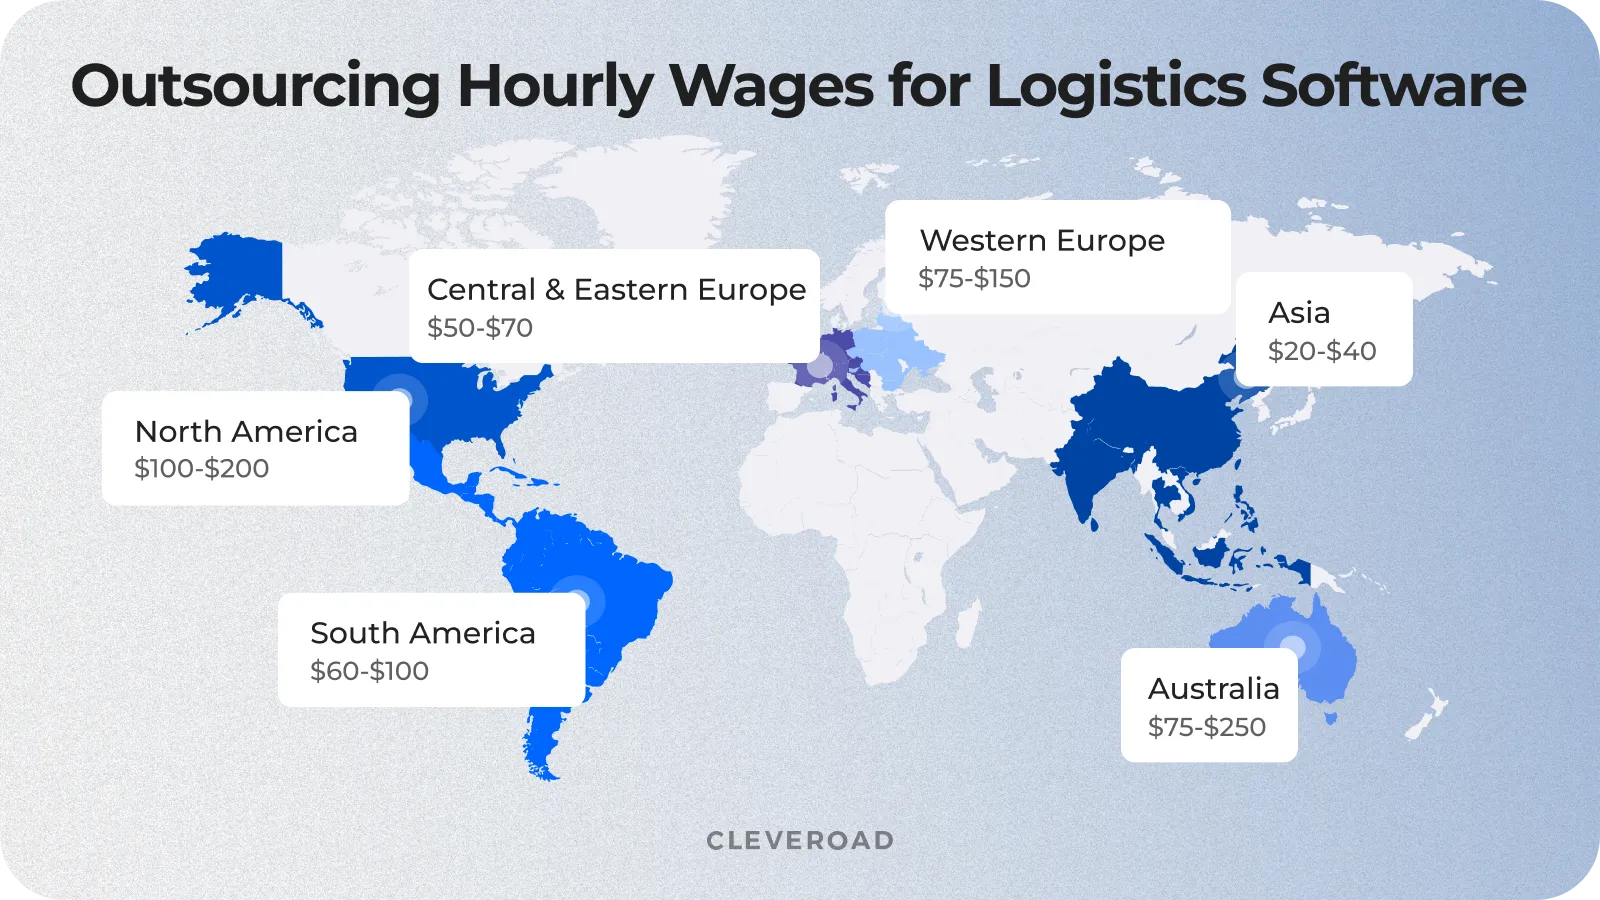 Logistics IT outsourcing hourly wages by regions